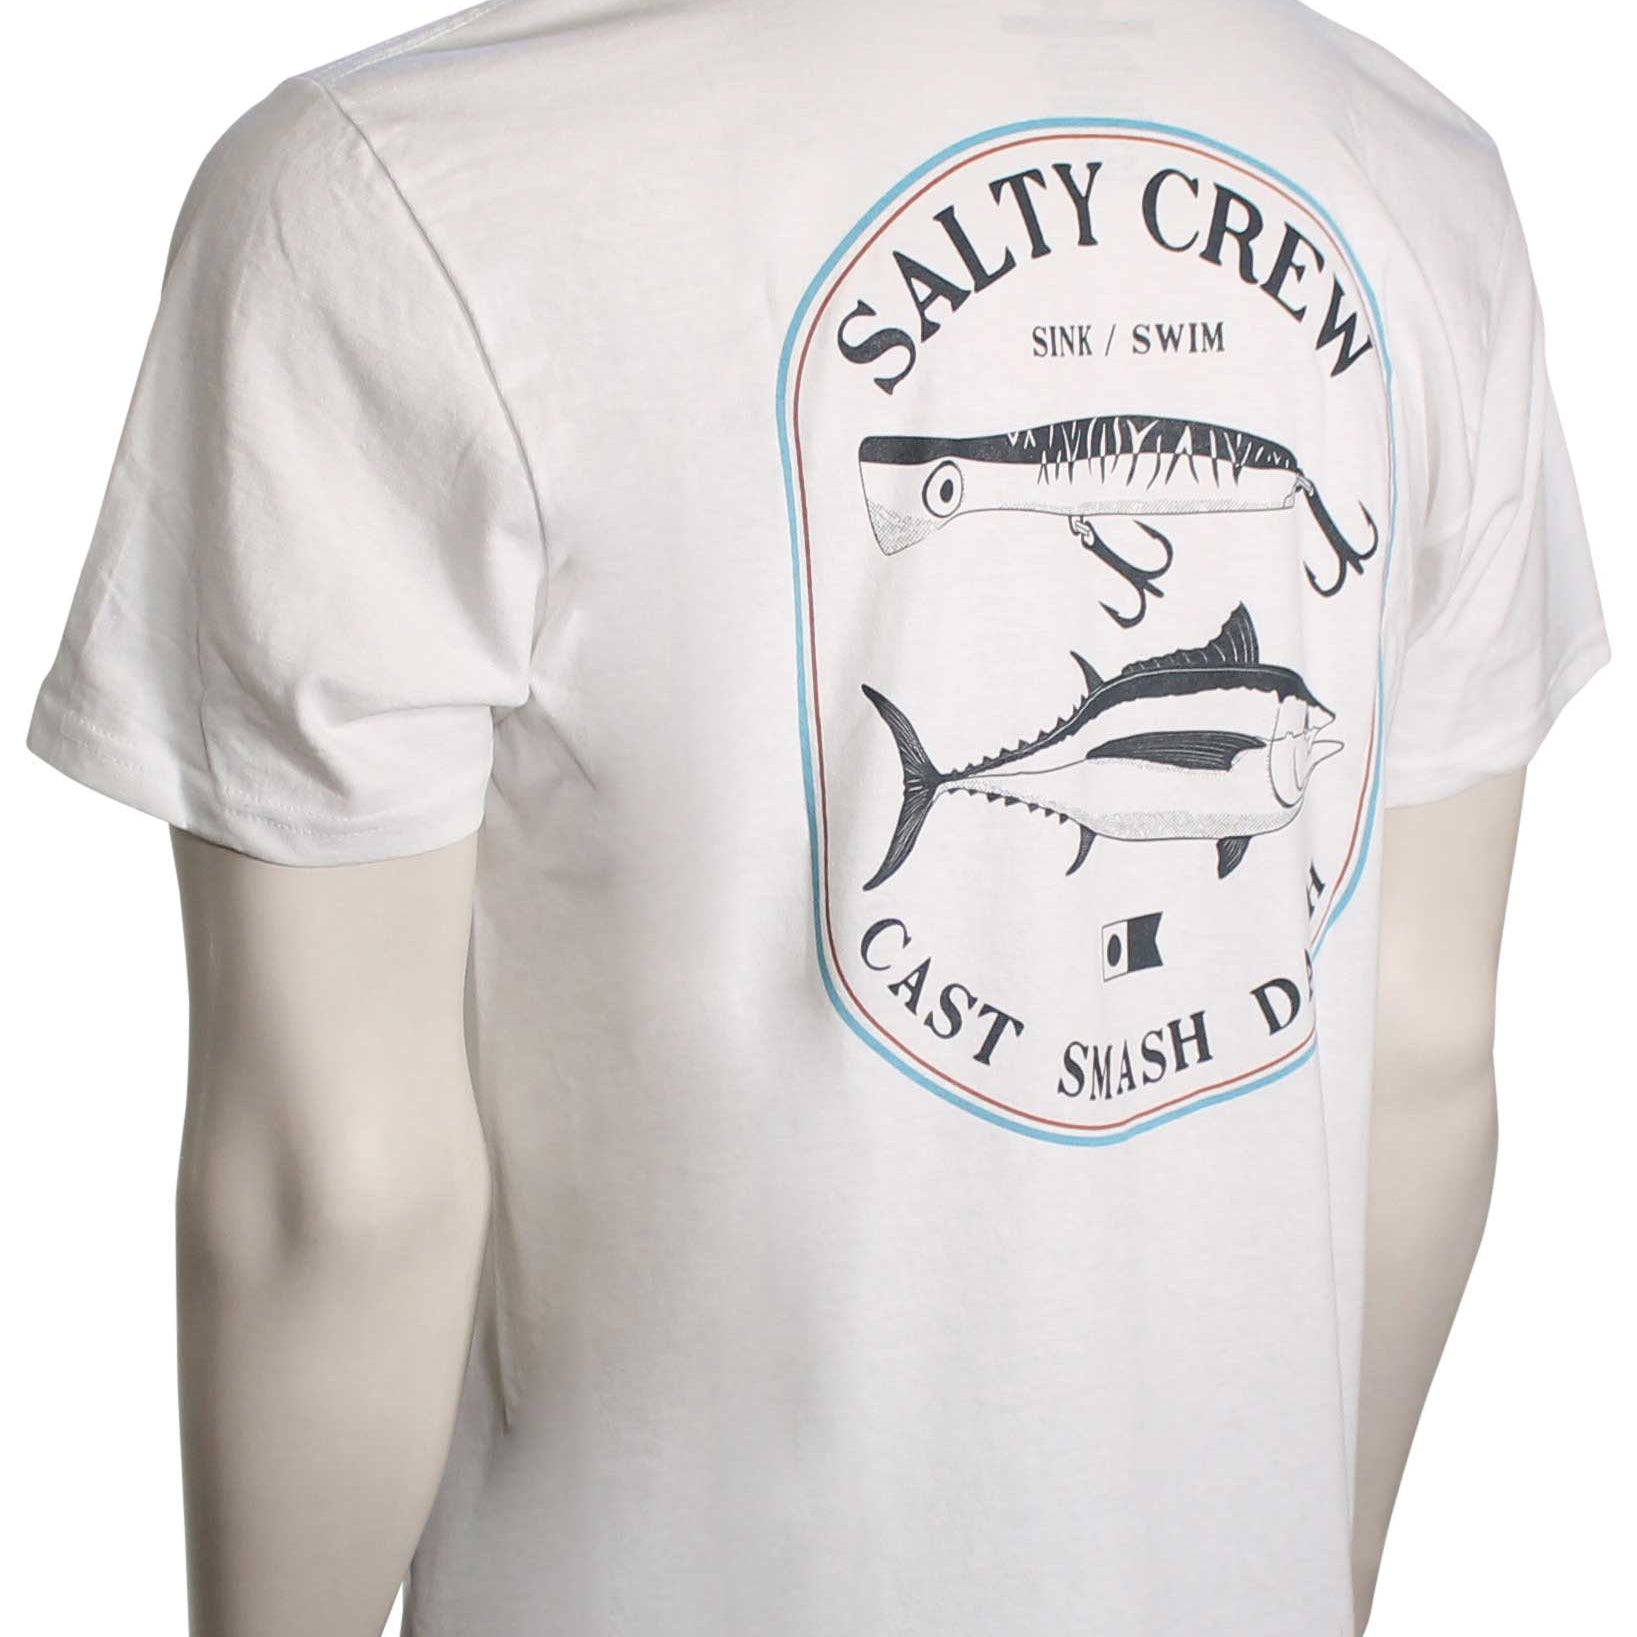 Salty Crew Surface Standard SS Tee White M